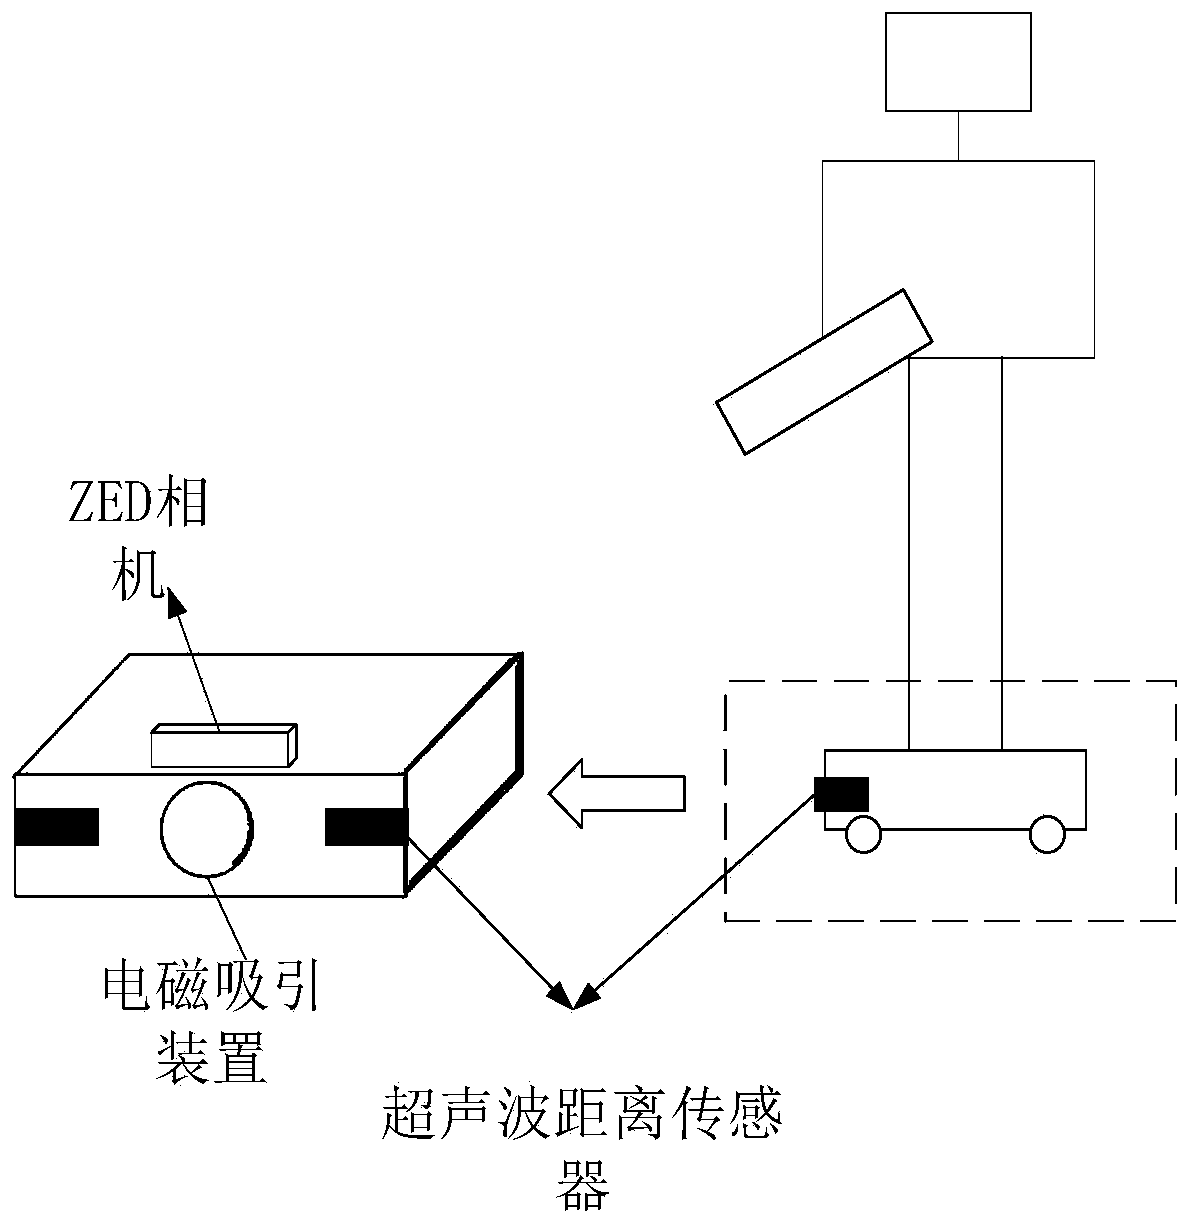 An intelligent manufacturing environment robot and vehicle computing intelligent drive delivery method and system